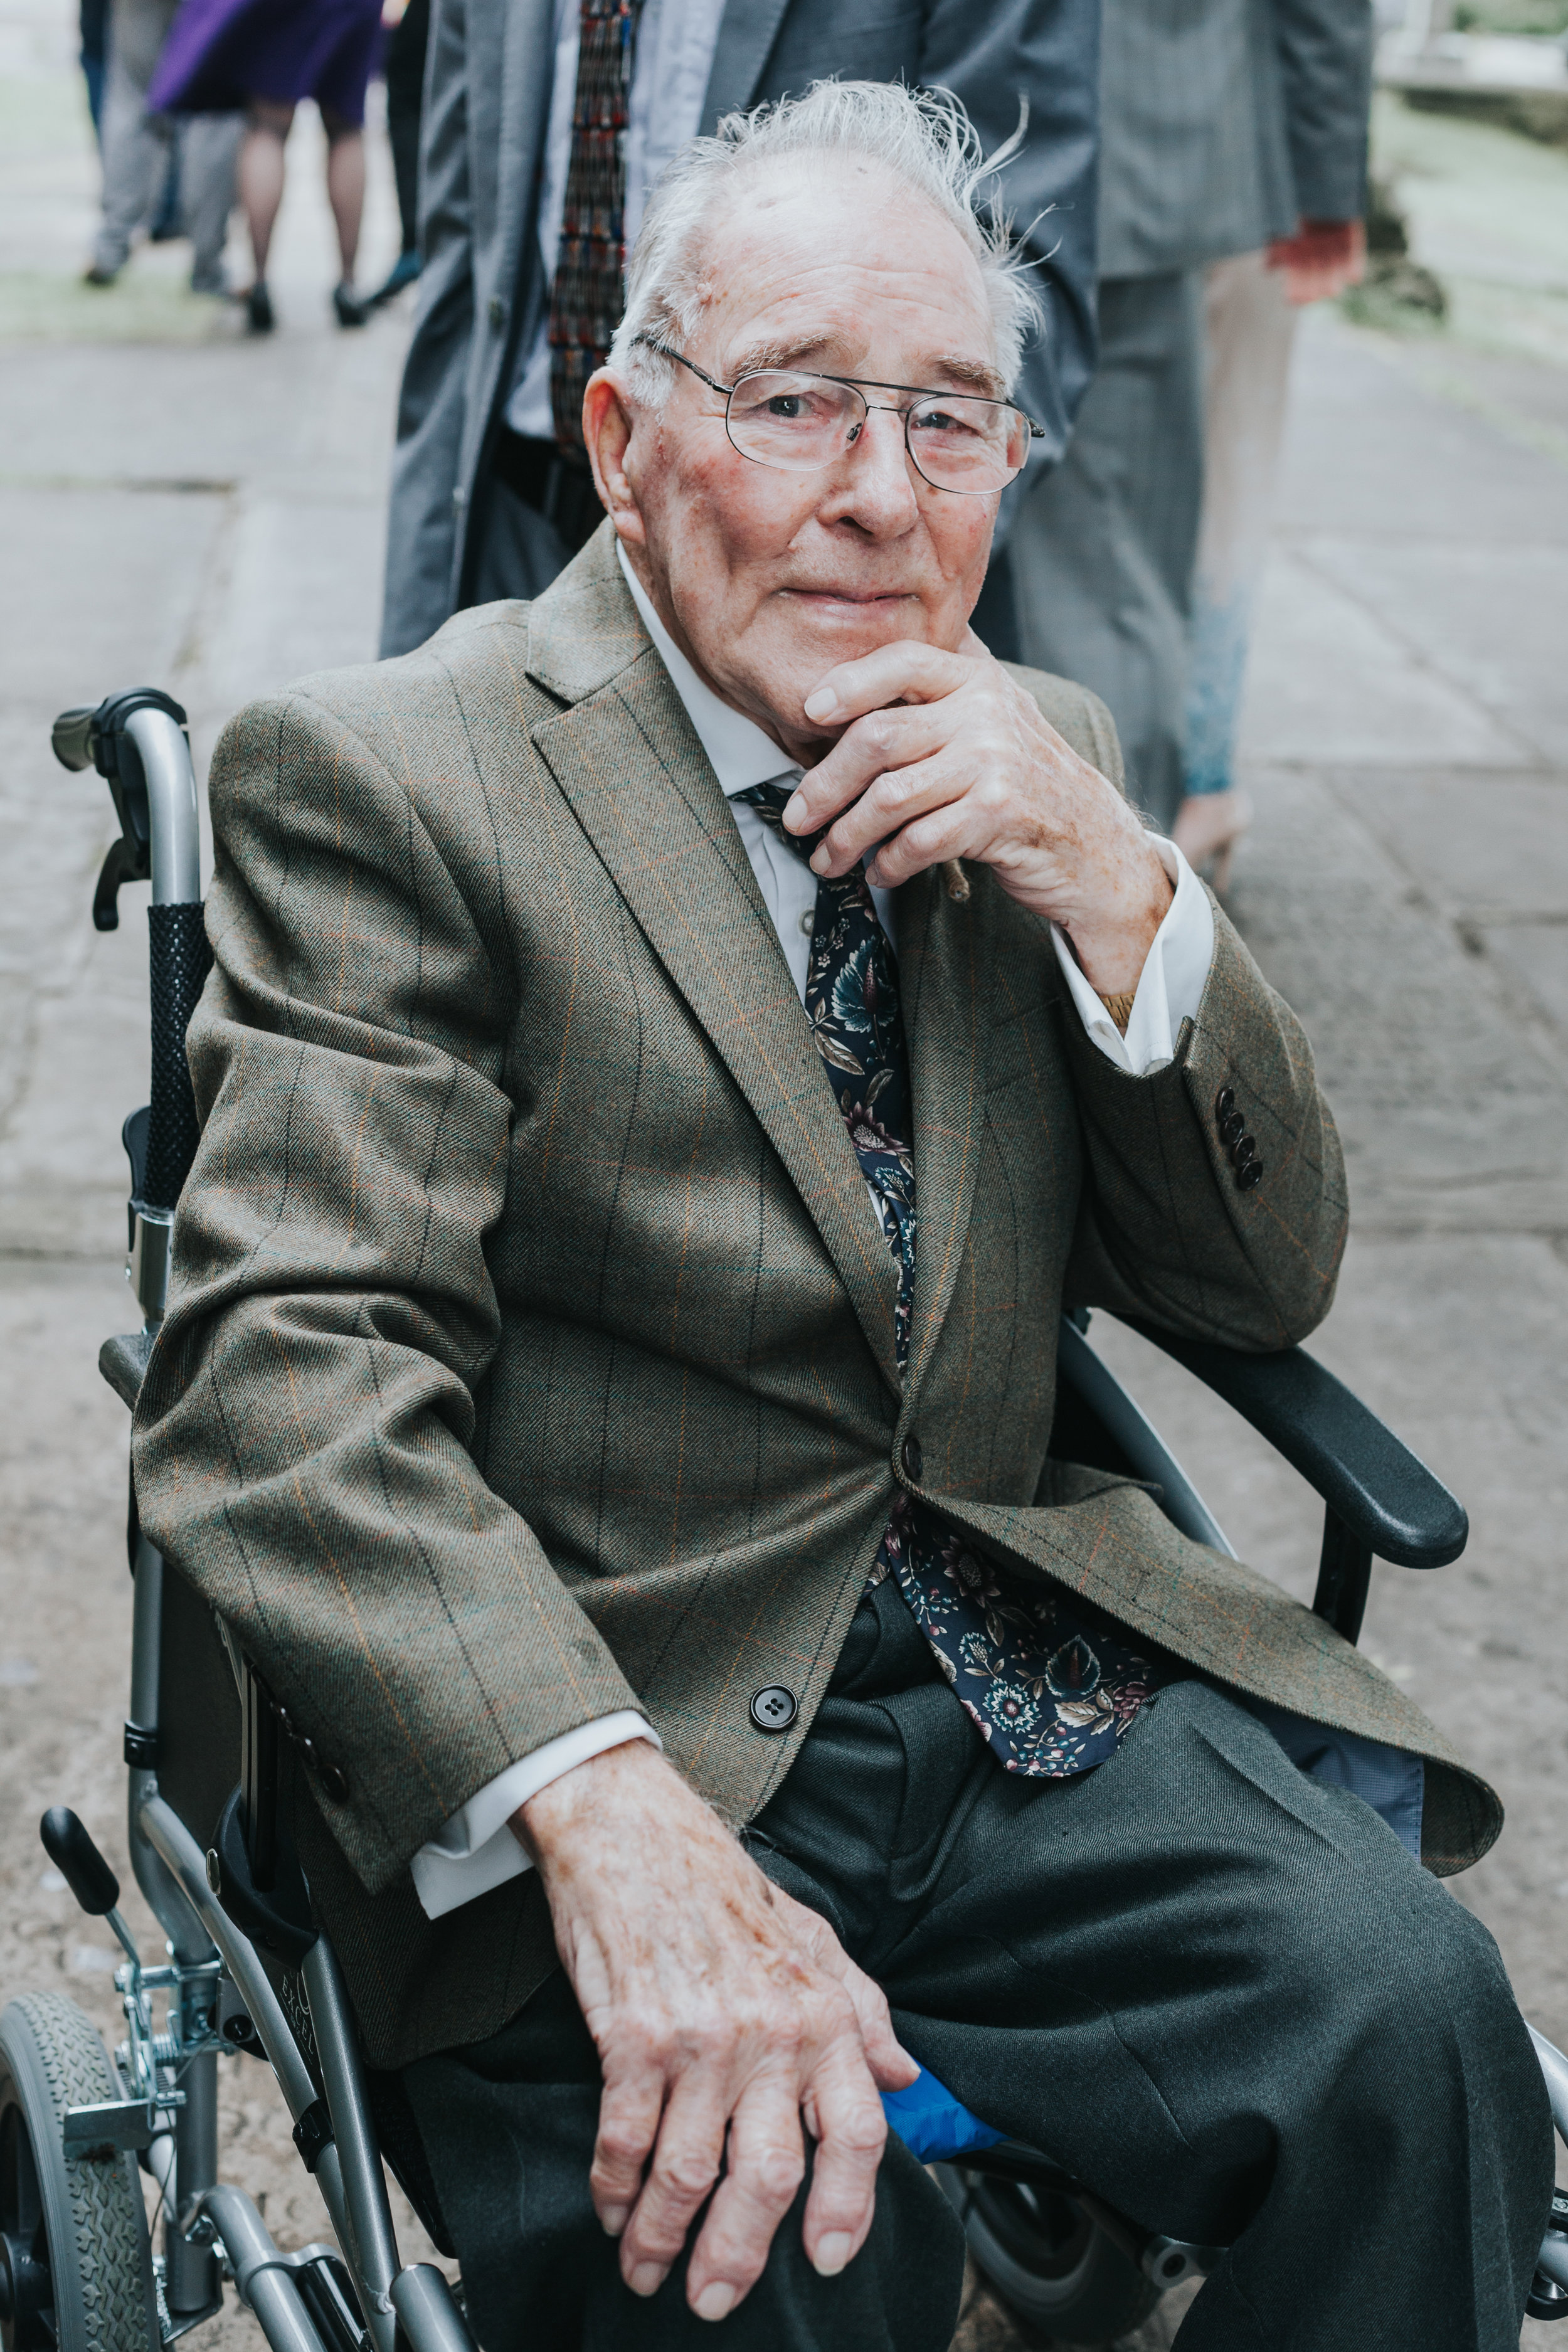  Granddad poses for photo outside church like a pro.&nbsp; 